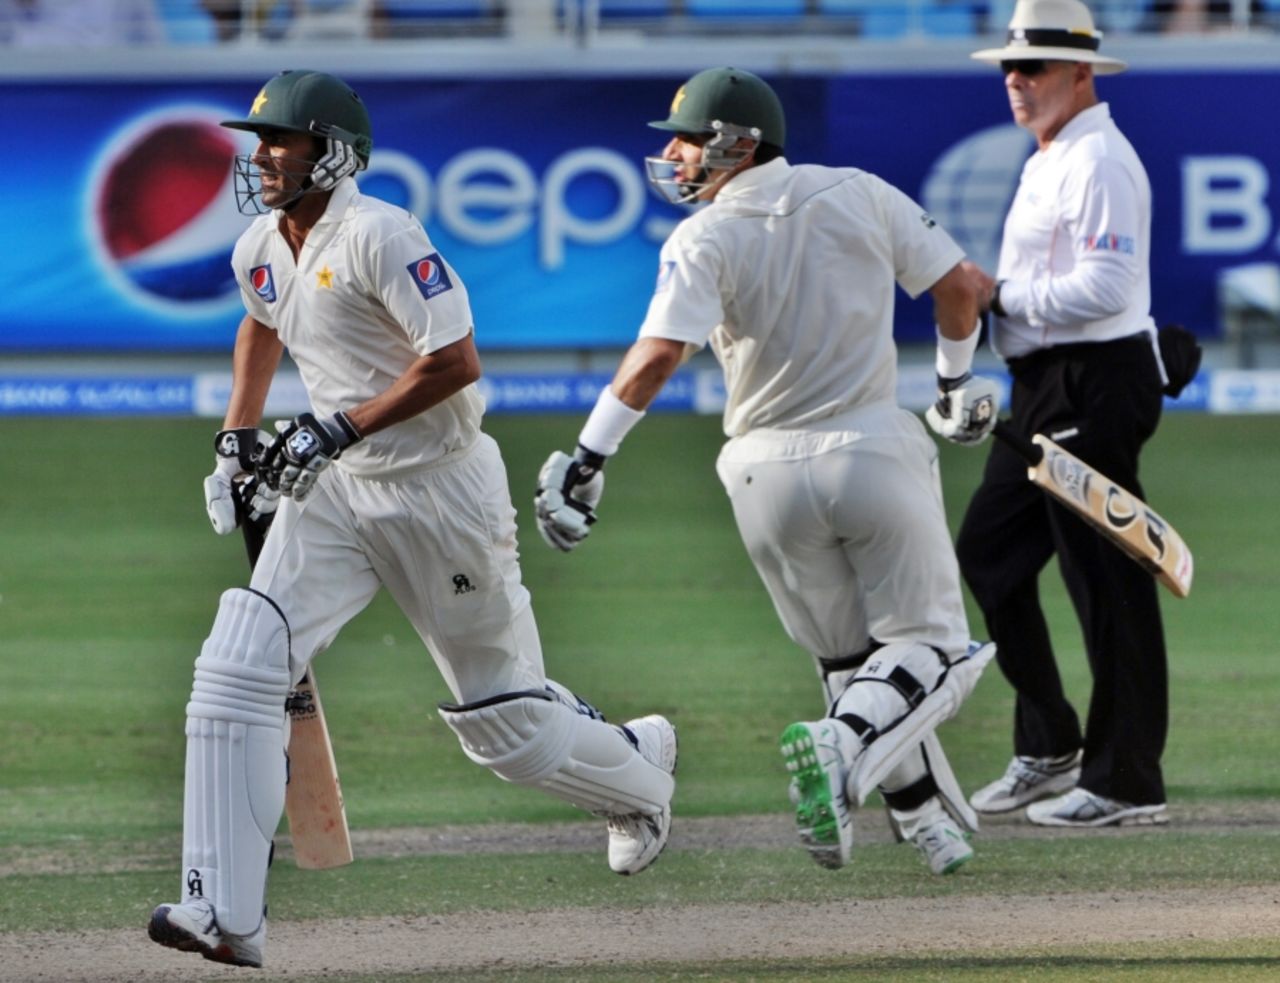 Misbah-ul-Haq and Younis Khan added an unbeaten 186 for the fourth wicket, a record stand for Pakistan against South Africa, Pakistan v South Africa, 1st Test, Dubai, November 16, 2010